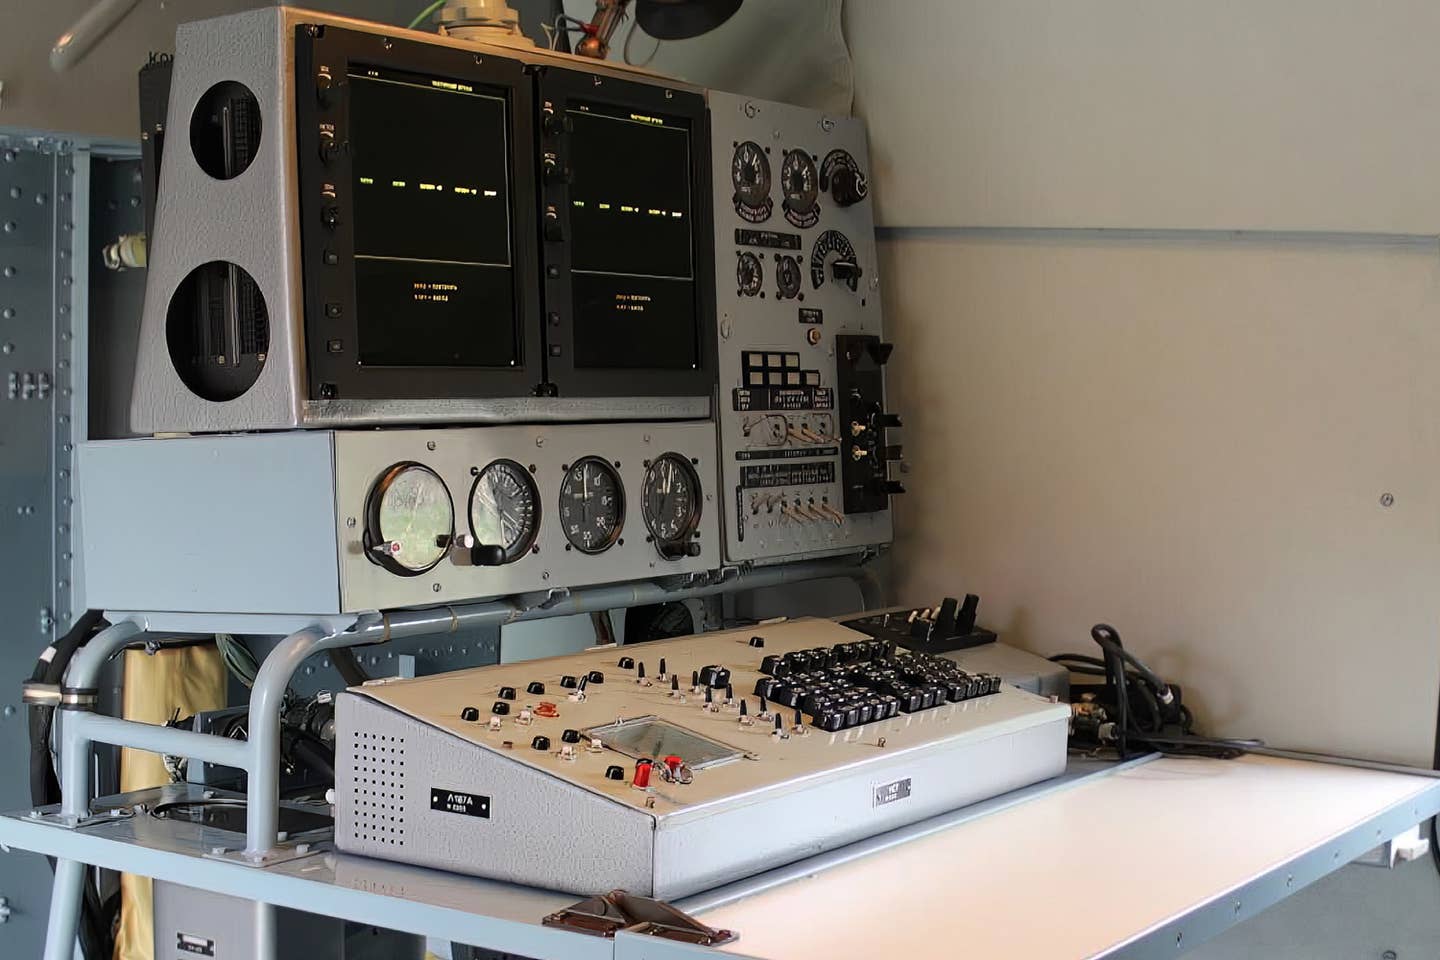 The system operator’s station in the front of the cabin. <em>KNIRTI</em>